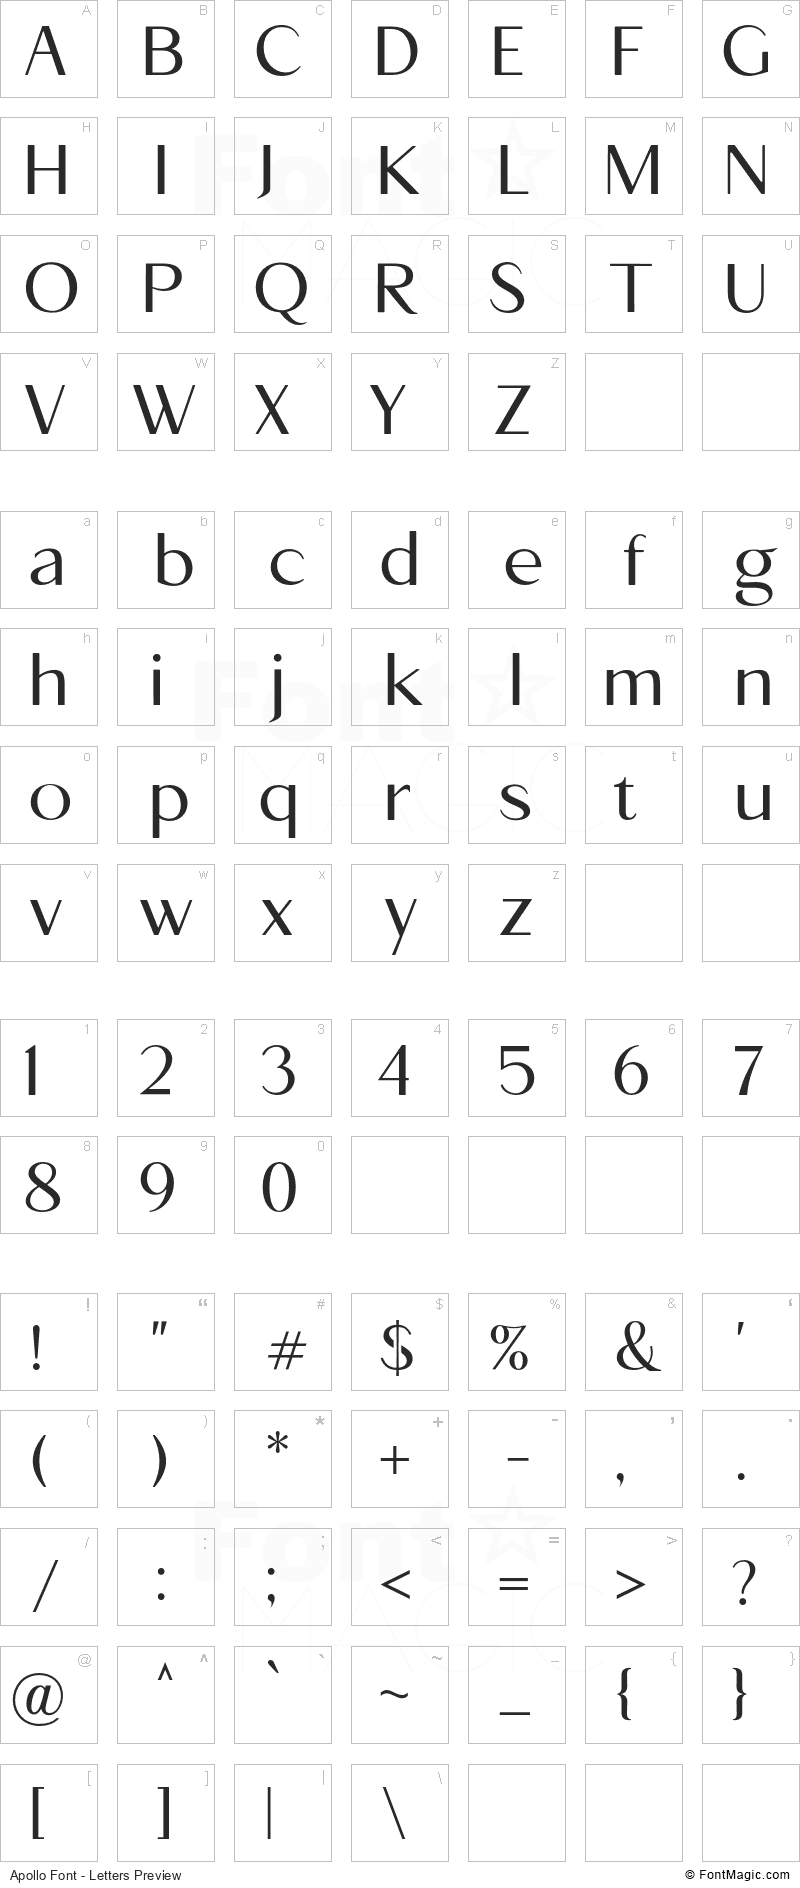 Apollo Font - All Latters Preview Chart